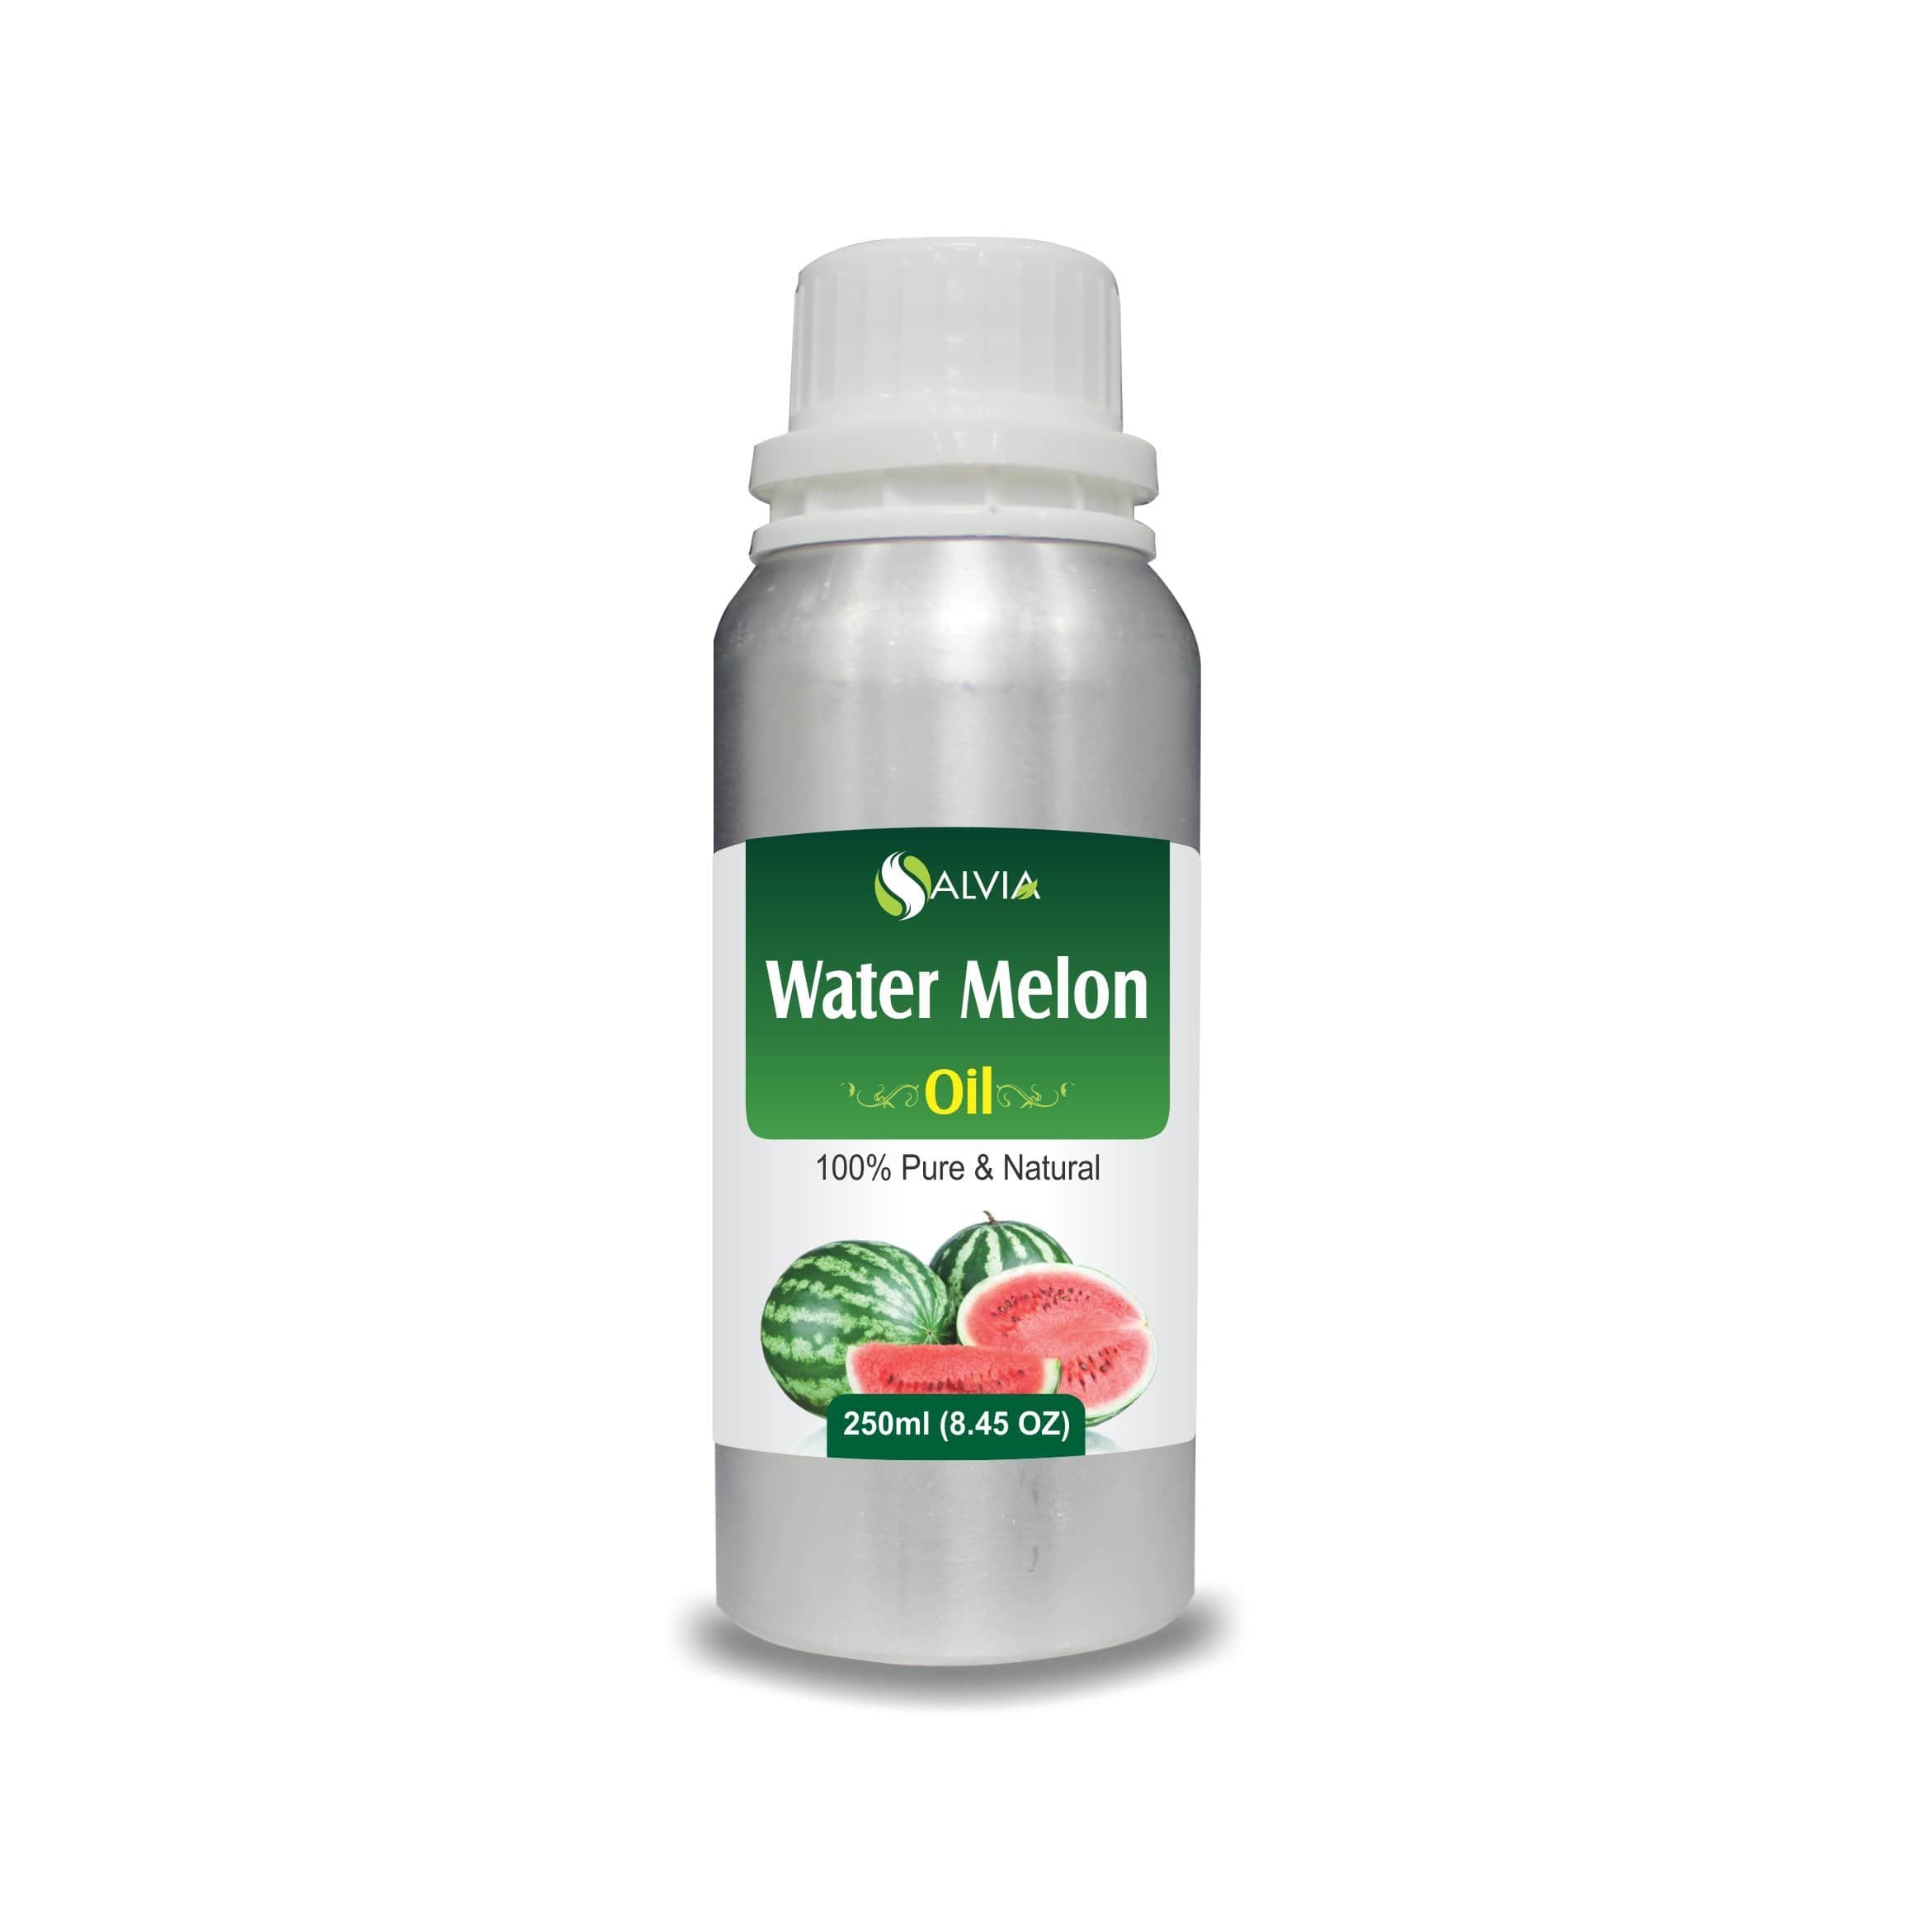 WATERMELON CARRIER OIL PURE & NATURAL UNDILUTED 3 ML TO 100 ML FROM INDIA